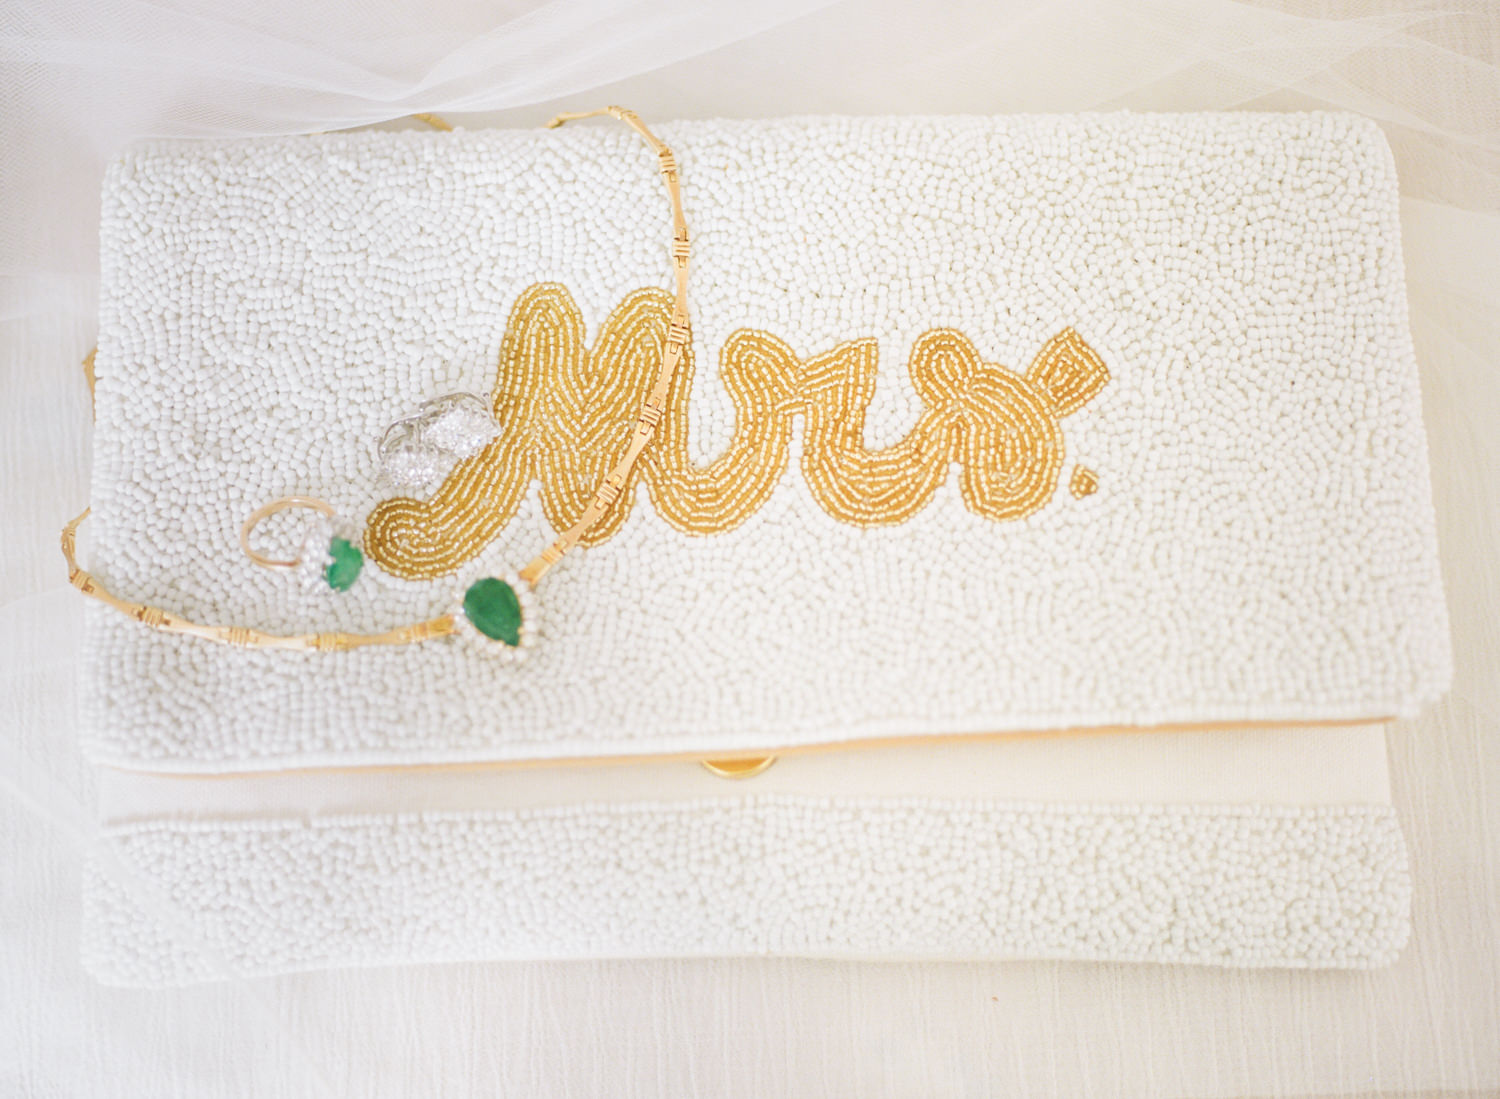 Mrs. bridal purse and green and gold jewelry; St. Louis wedding photographer